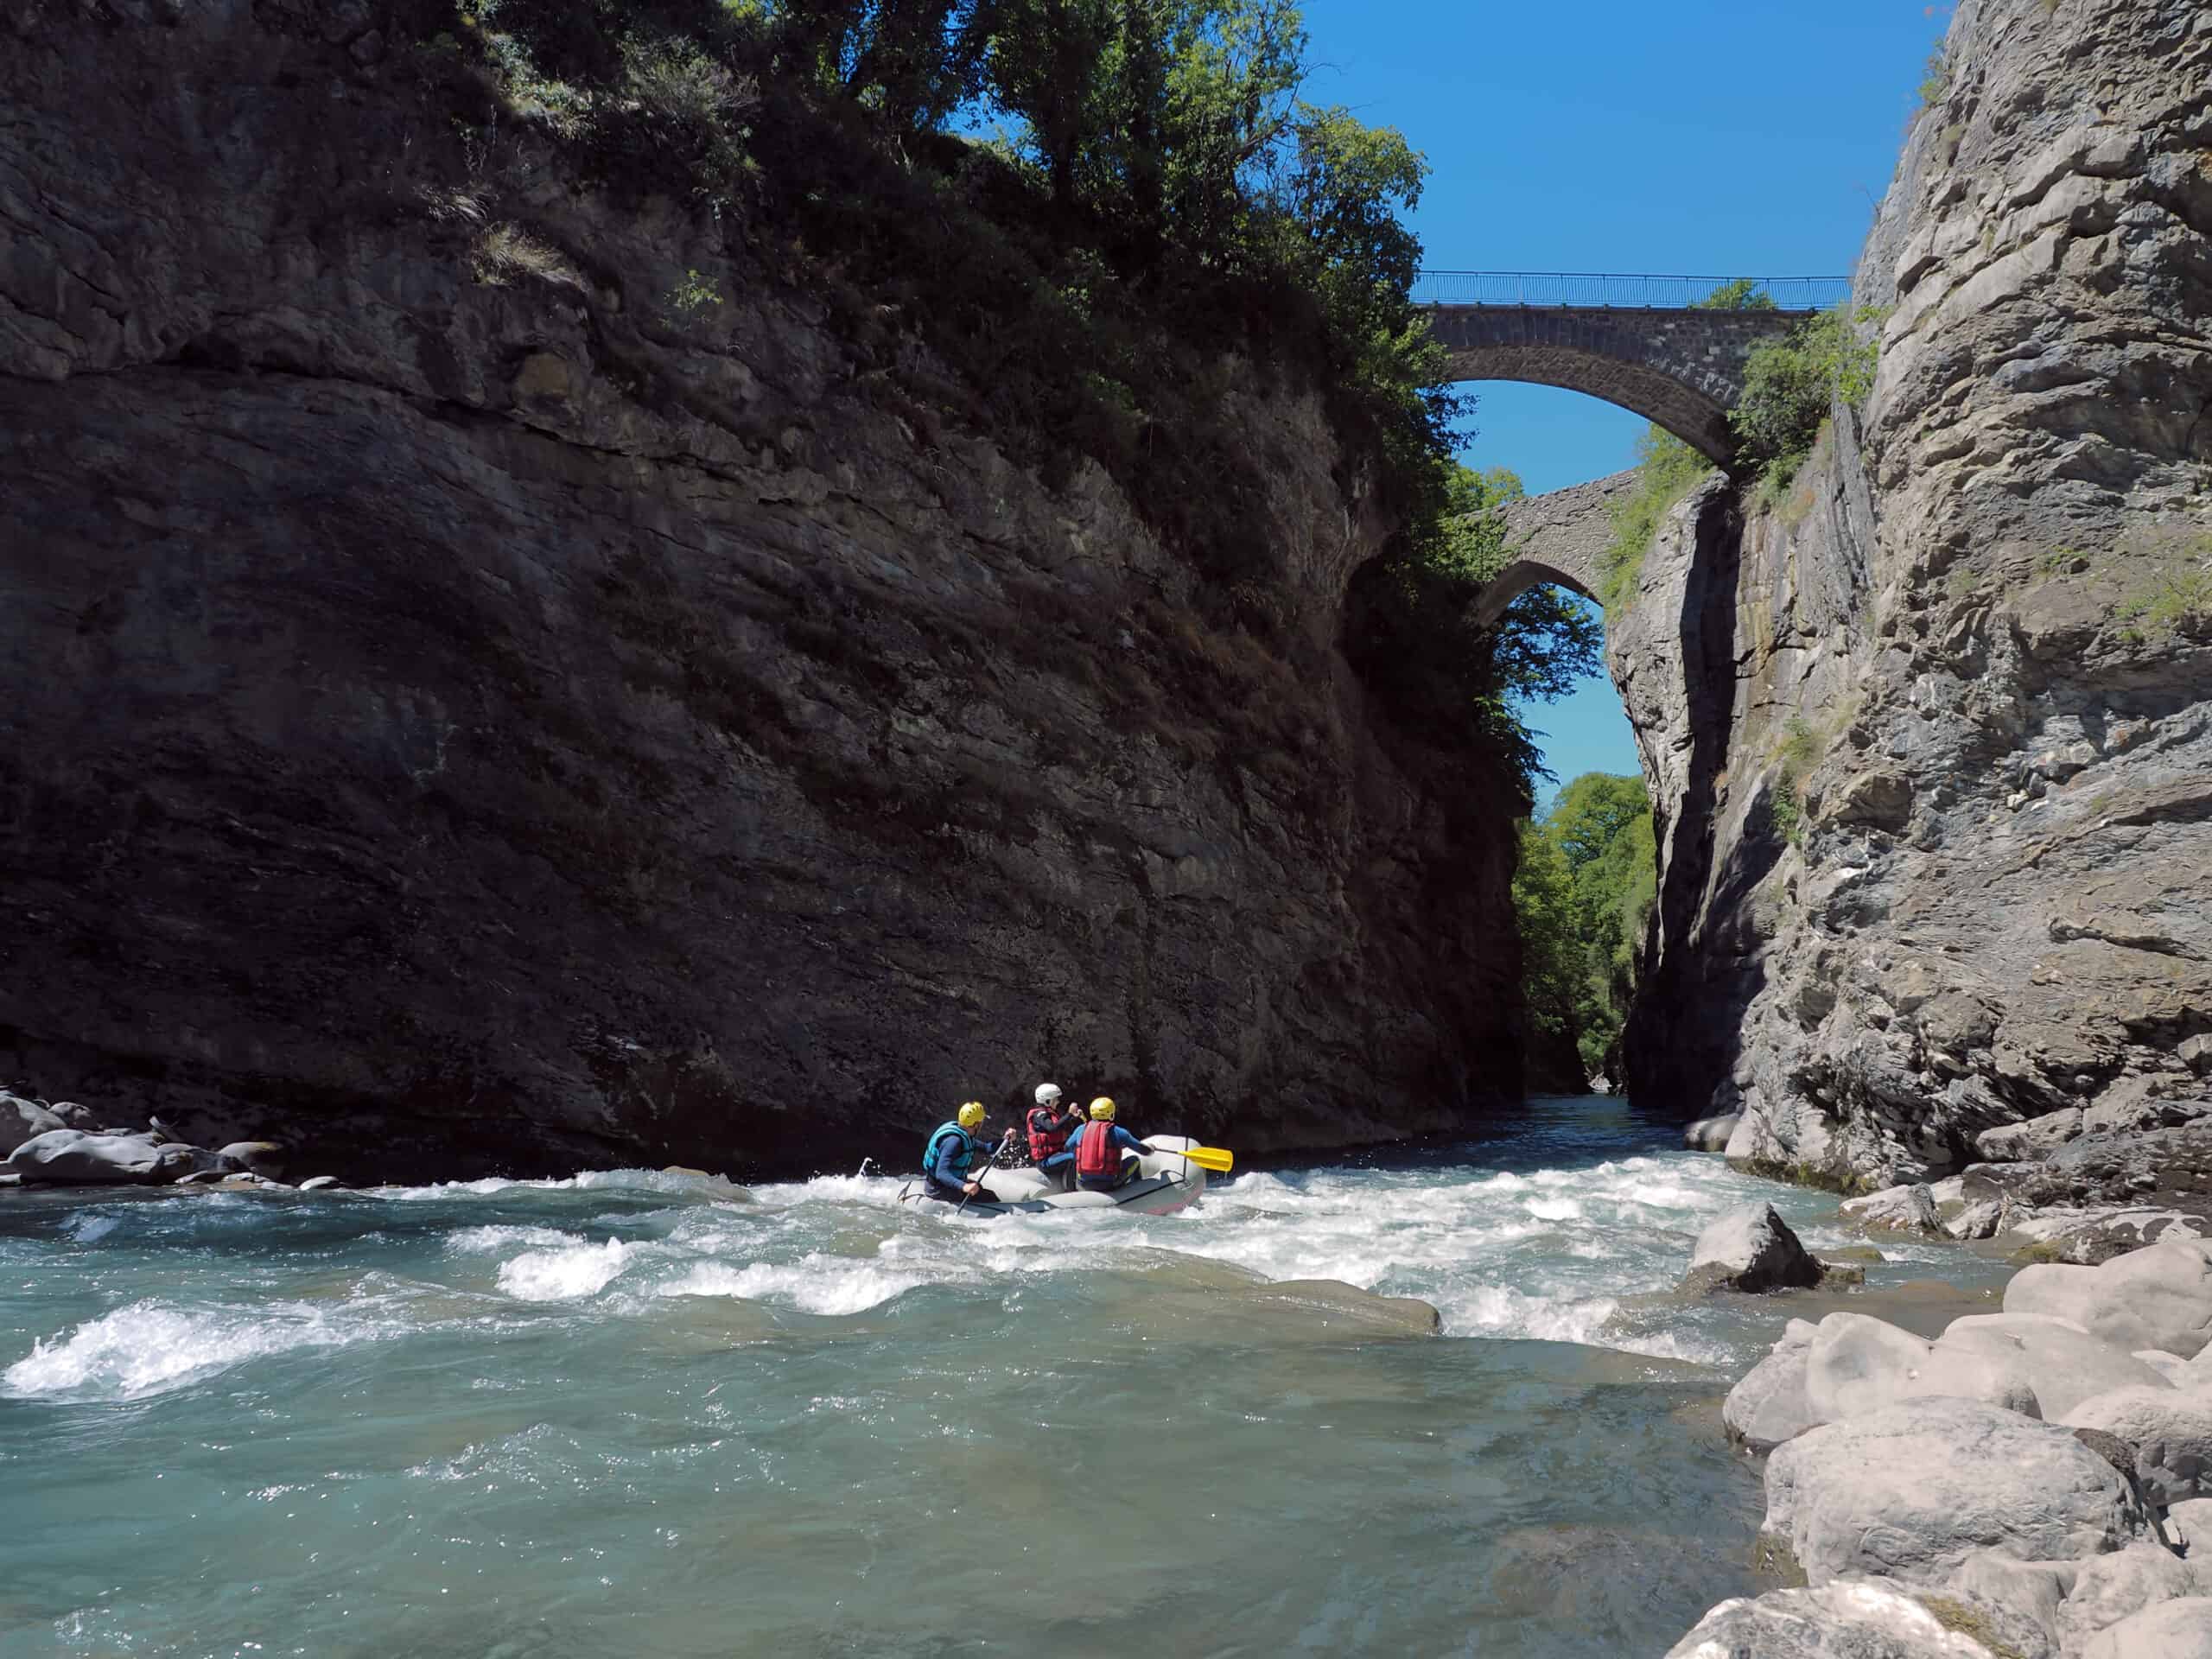 Come and discover the Ubaye river in the Alpes de Haute Provence